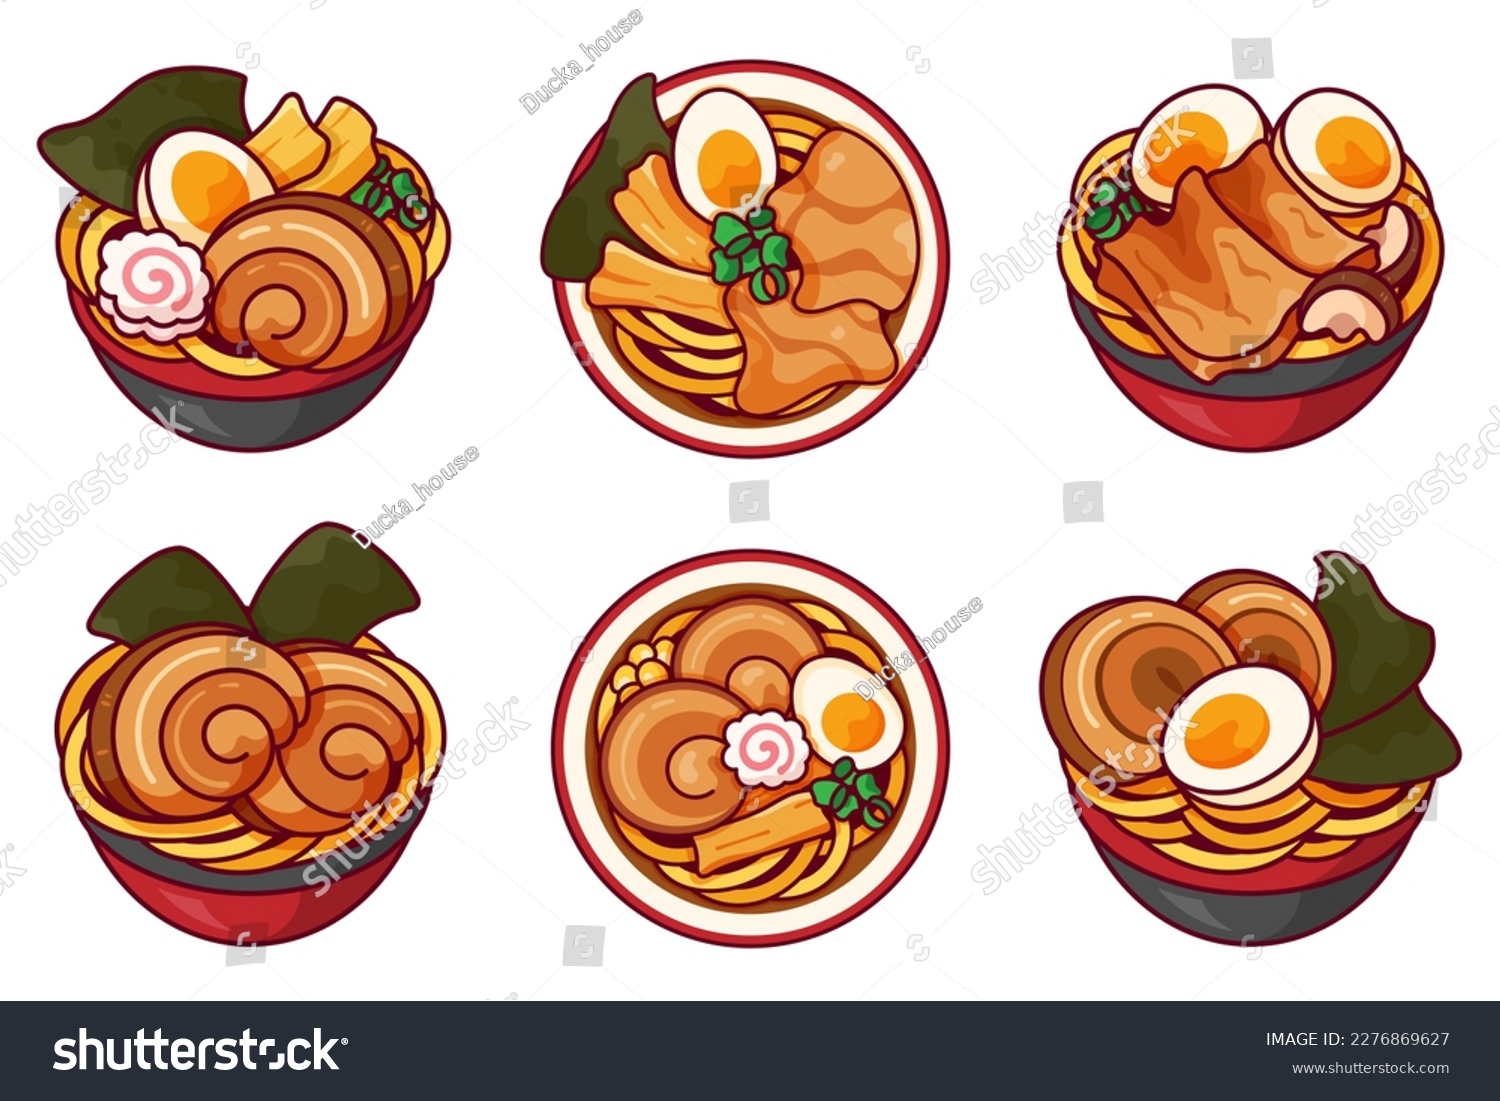 SVG of Japanese ramen noodle soup recipe set vector. Japanese noodles ramen with chashu pork, egg, naruto fish cake, bamboo and seaweed isolated illustration vector. Chashu pork ramen icon design. svg